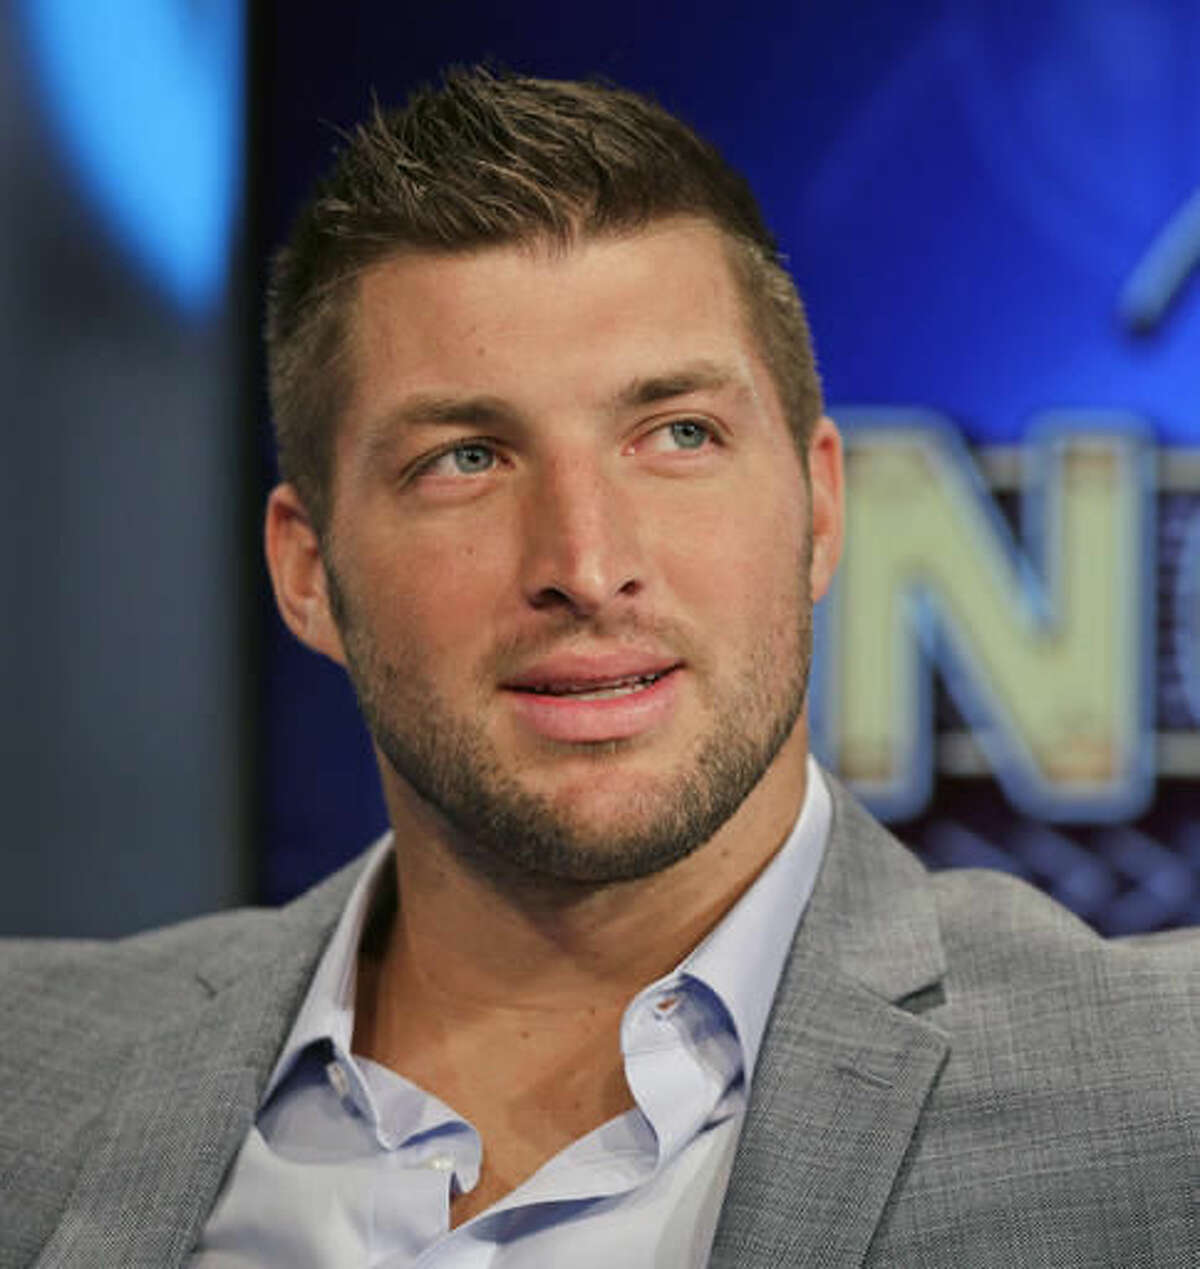 FILE - In this Aug. 6, 2014, file photo, Tim Tebow ponders a question during an interview on the set of ESPN's new SEC Network in Charlotte, N.C. With professional football not working out, Tebow is going to give baseball a try. The 2007 Heisman Trophy winner and former NFL first-round draft pick plans to hold a workout for Major League Baseball teams this month. Tebow last played organized baseball in high school. ESPN first reported the news. (AP Photo/Chuck Burton, File)